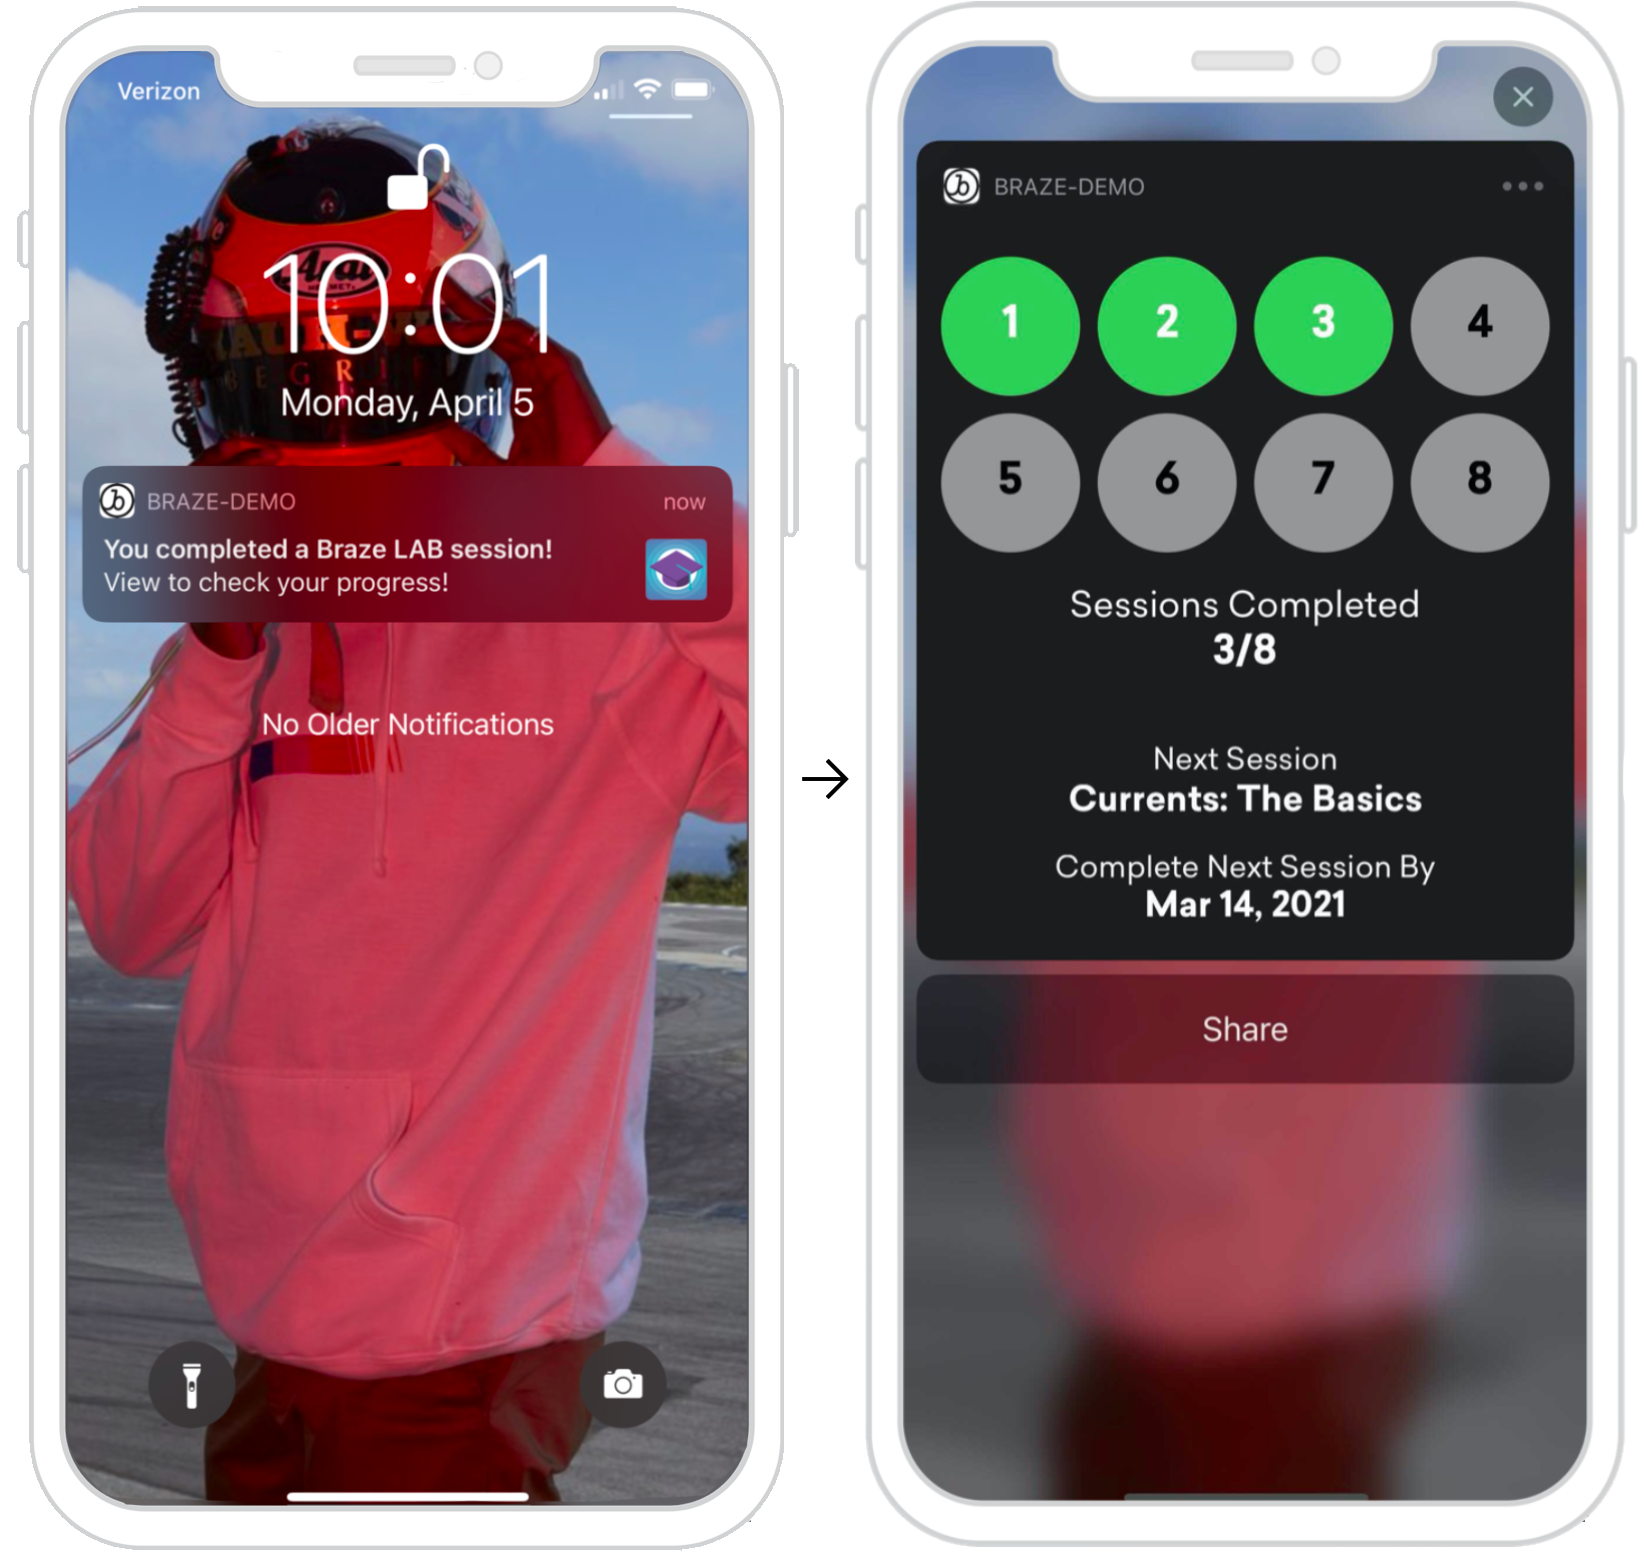 Two iPhones displayed side-by-side. The first iPhone shows the unexpanded view of the push message. The second iPhone shows the expanded version of the push message displaying a "progress" shot of how far they are through a course, the next session, and when the next session id due by.